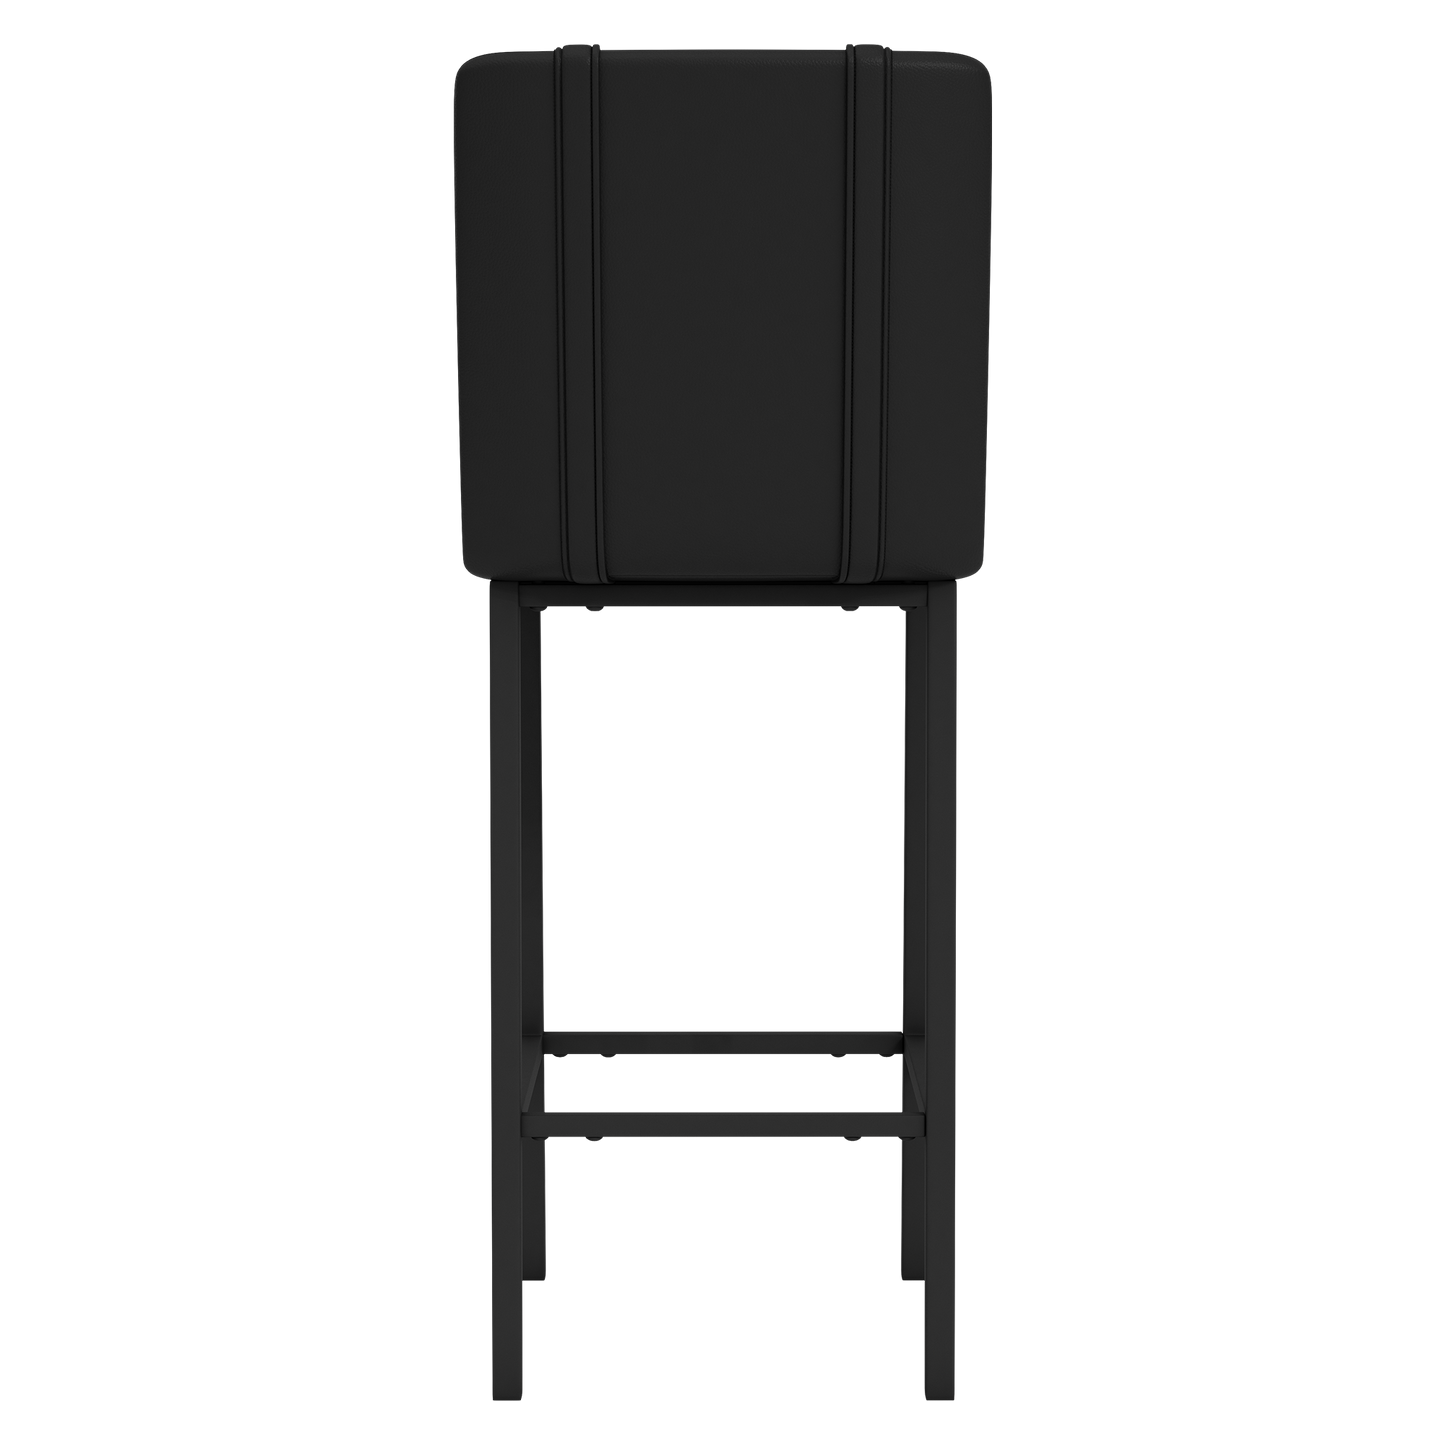 Bar Stool 500 with Heat Check Gaming Primary Set of 2